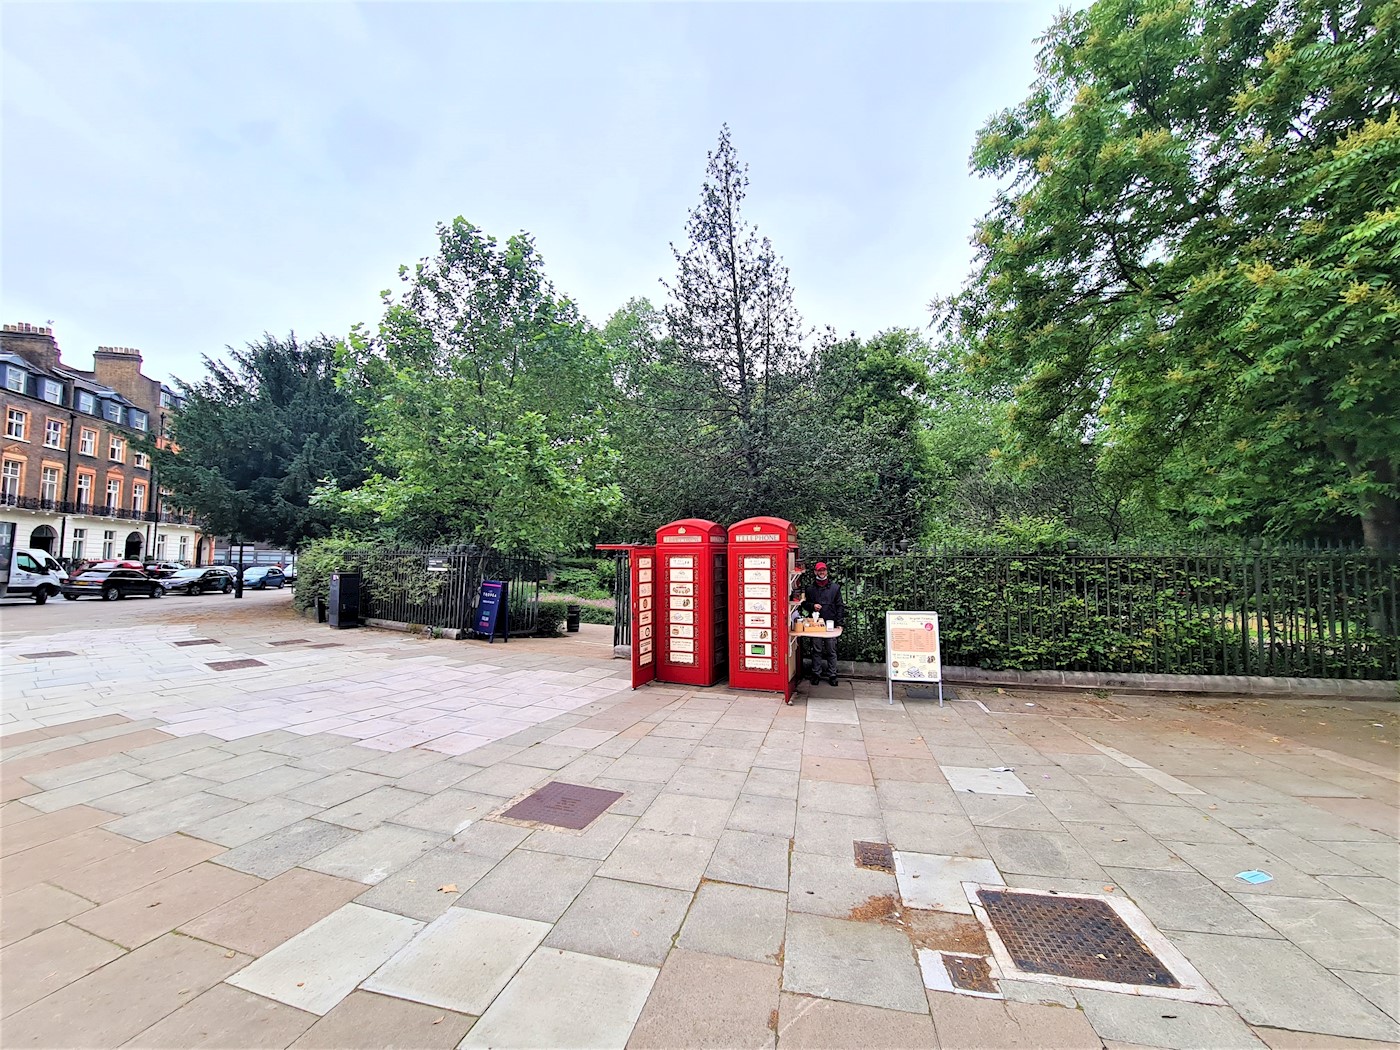 Telephone Kiosk 1 & 2, Opposite Imperial Hotel, Russell Square, Camden, WC1B 5EH 1/2